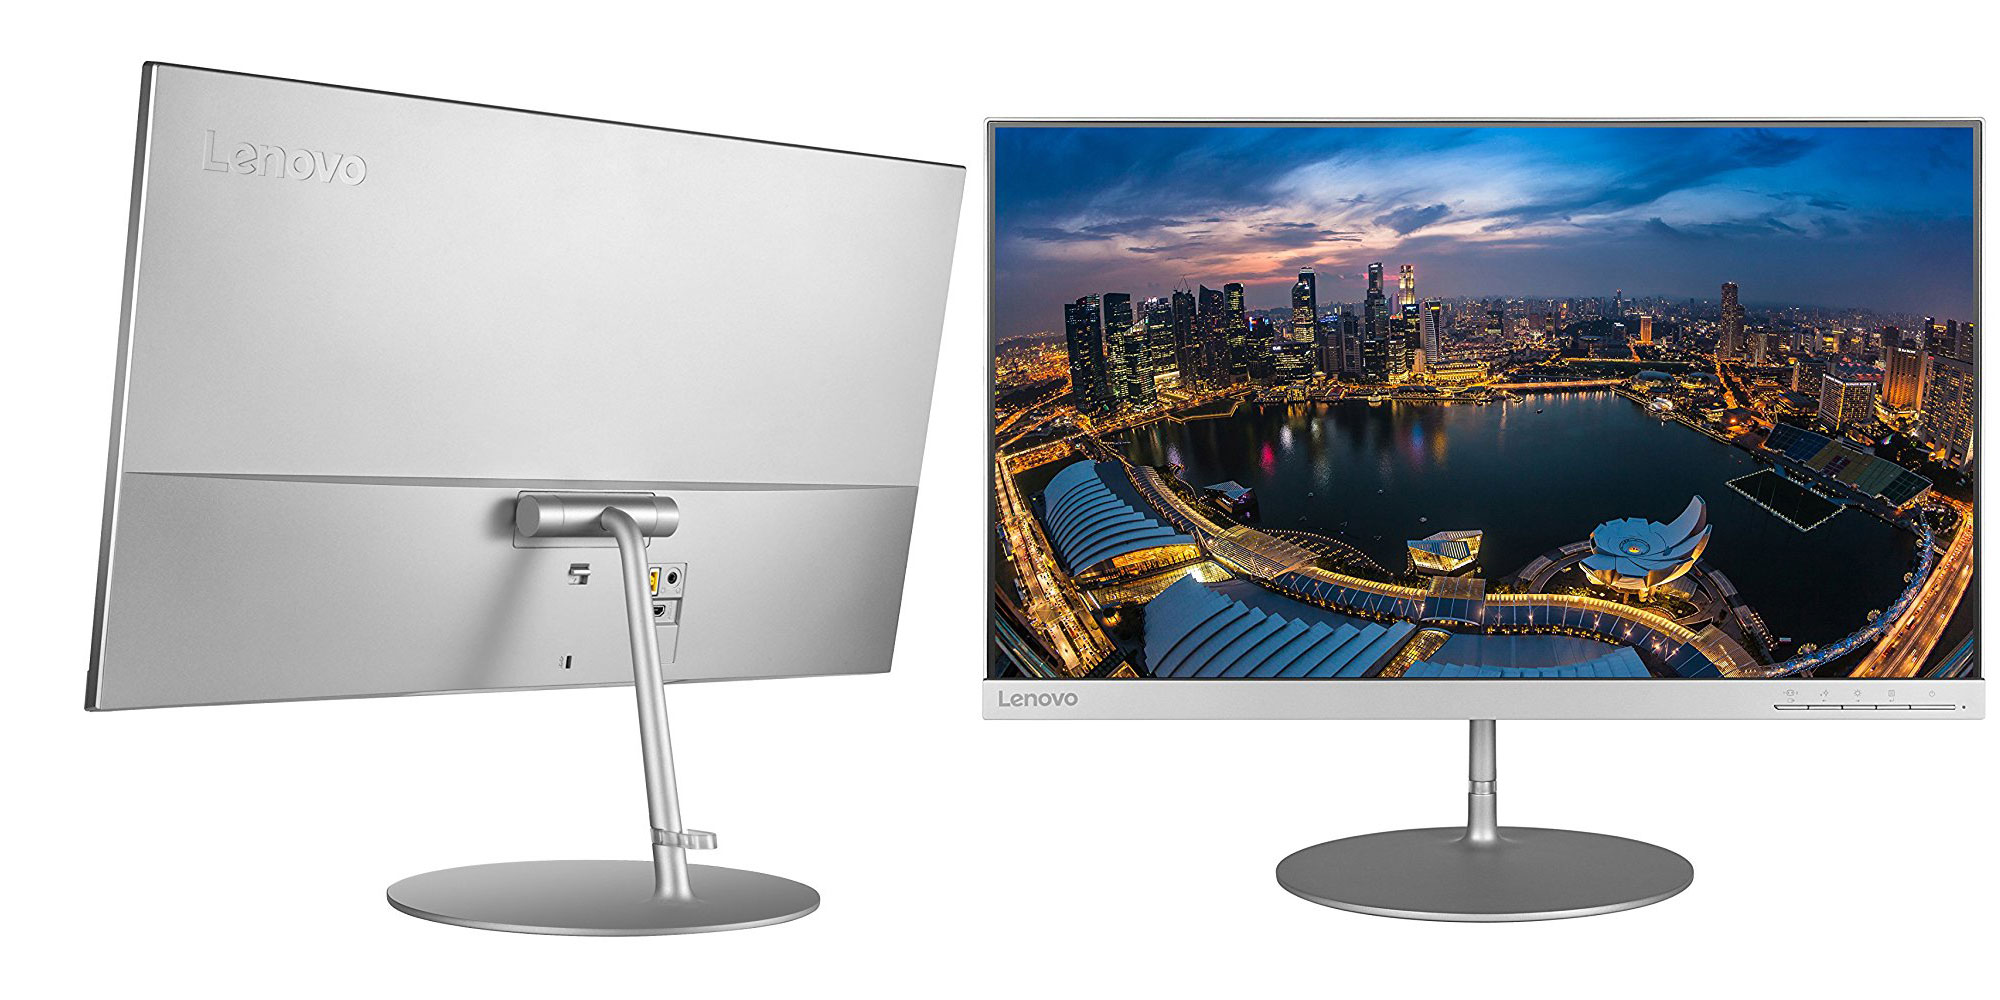 Lenovo's 24-inch 1440P monitor gives you room to for